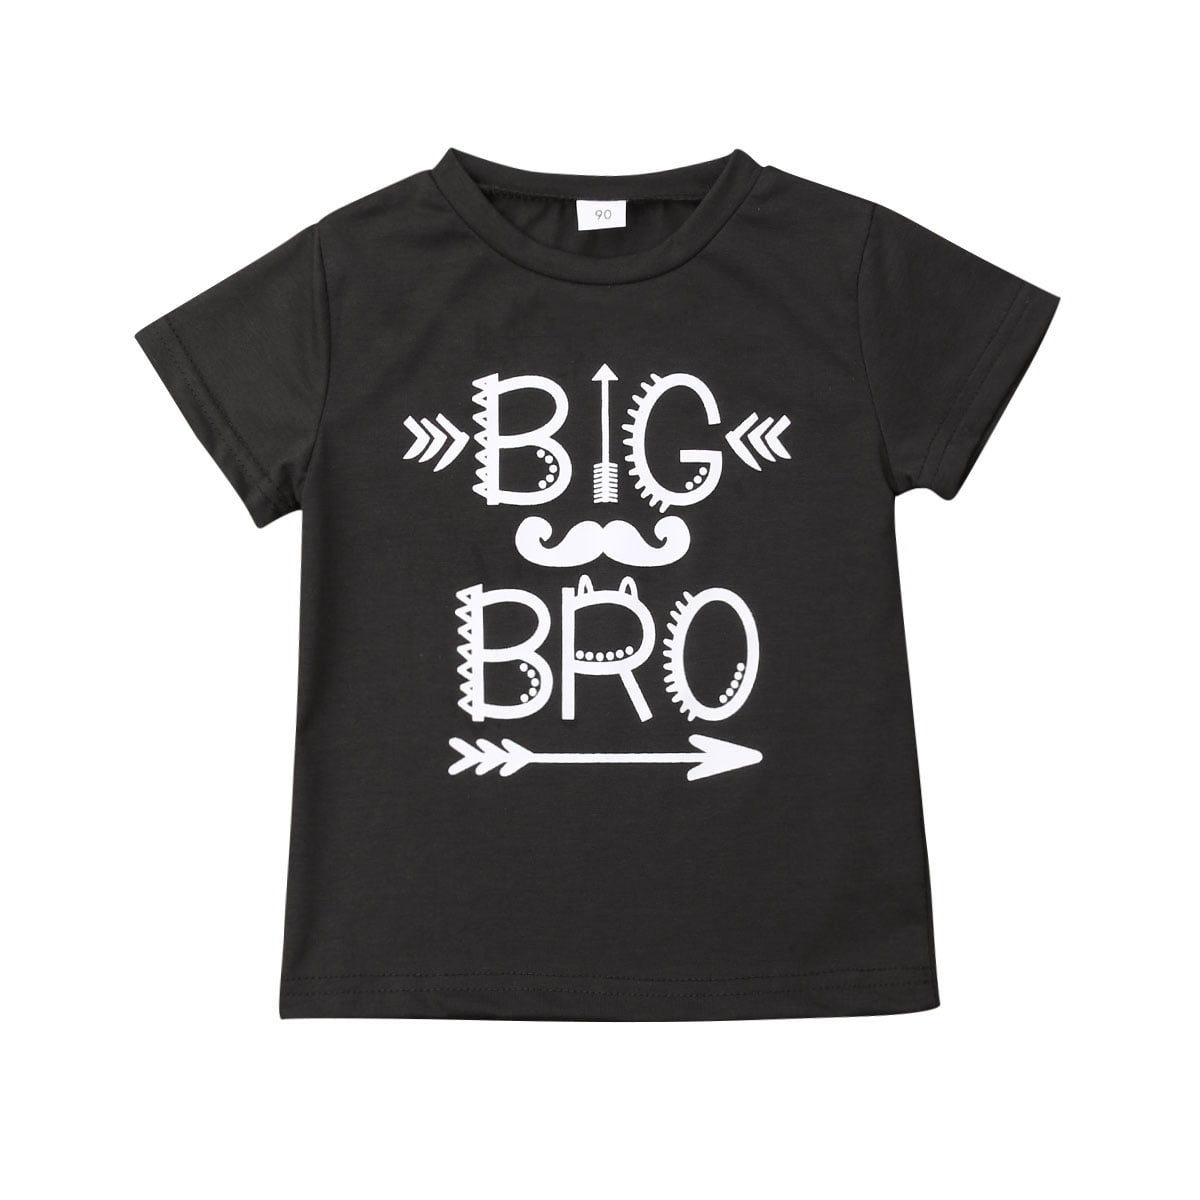 Baby Boy Brother Matching Clothes Newborn Little Brother Romper Bodysuit Kid Big Brother T-Shirt